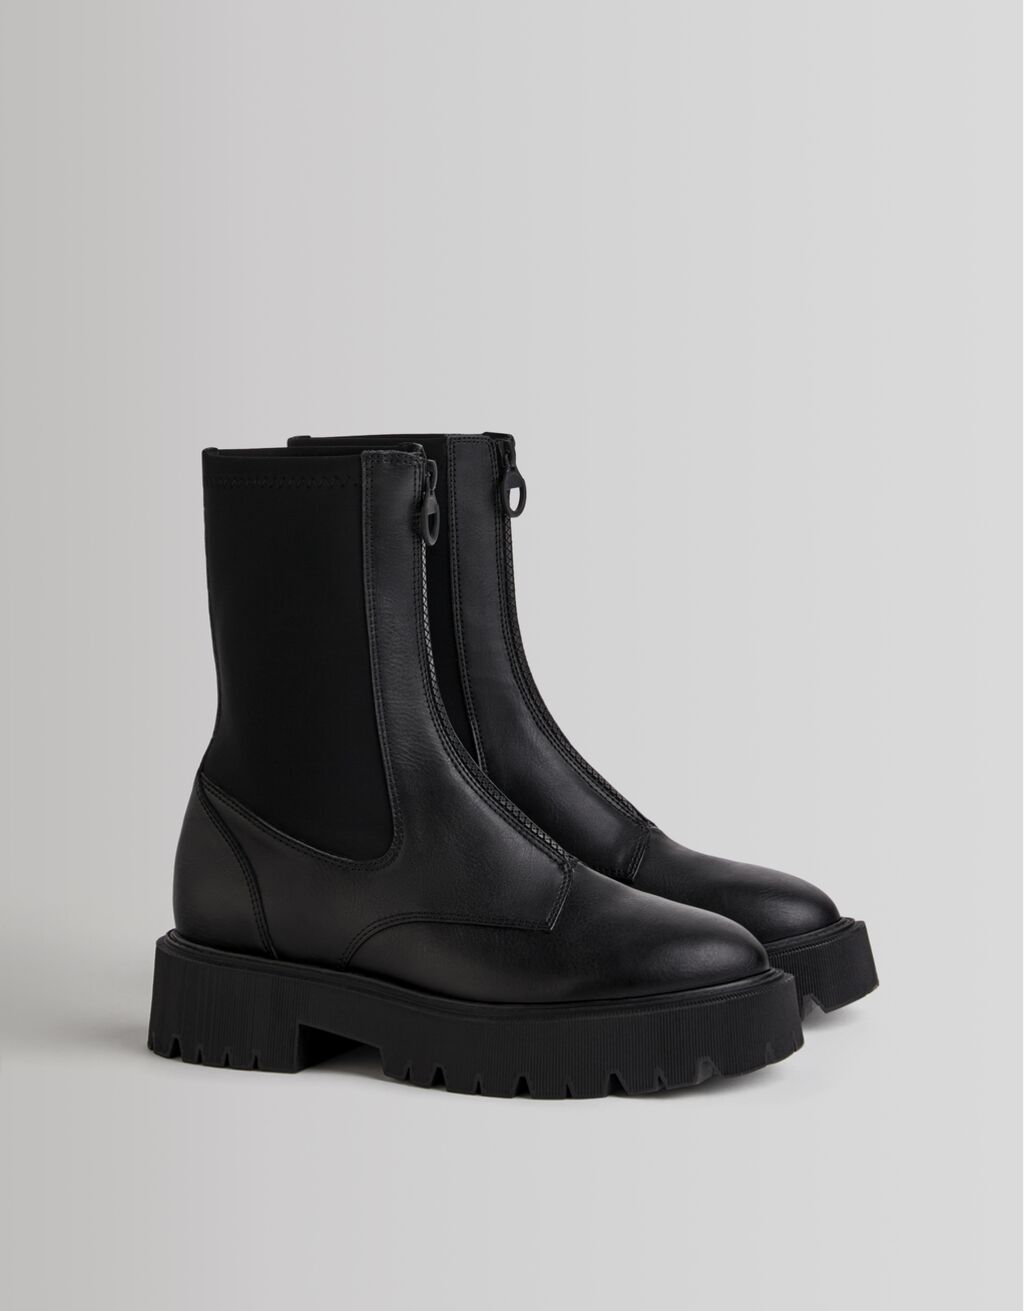 Contrast ankle boots with front zip